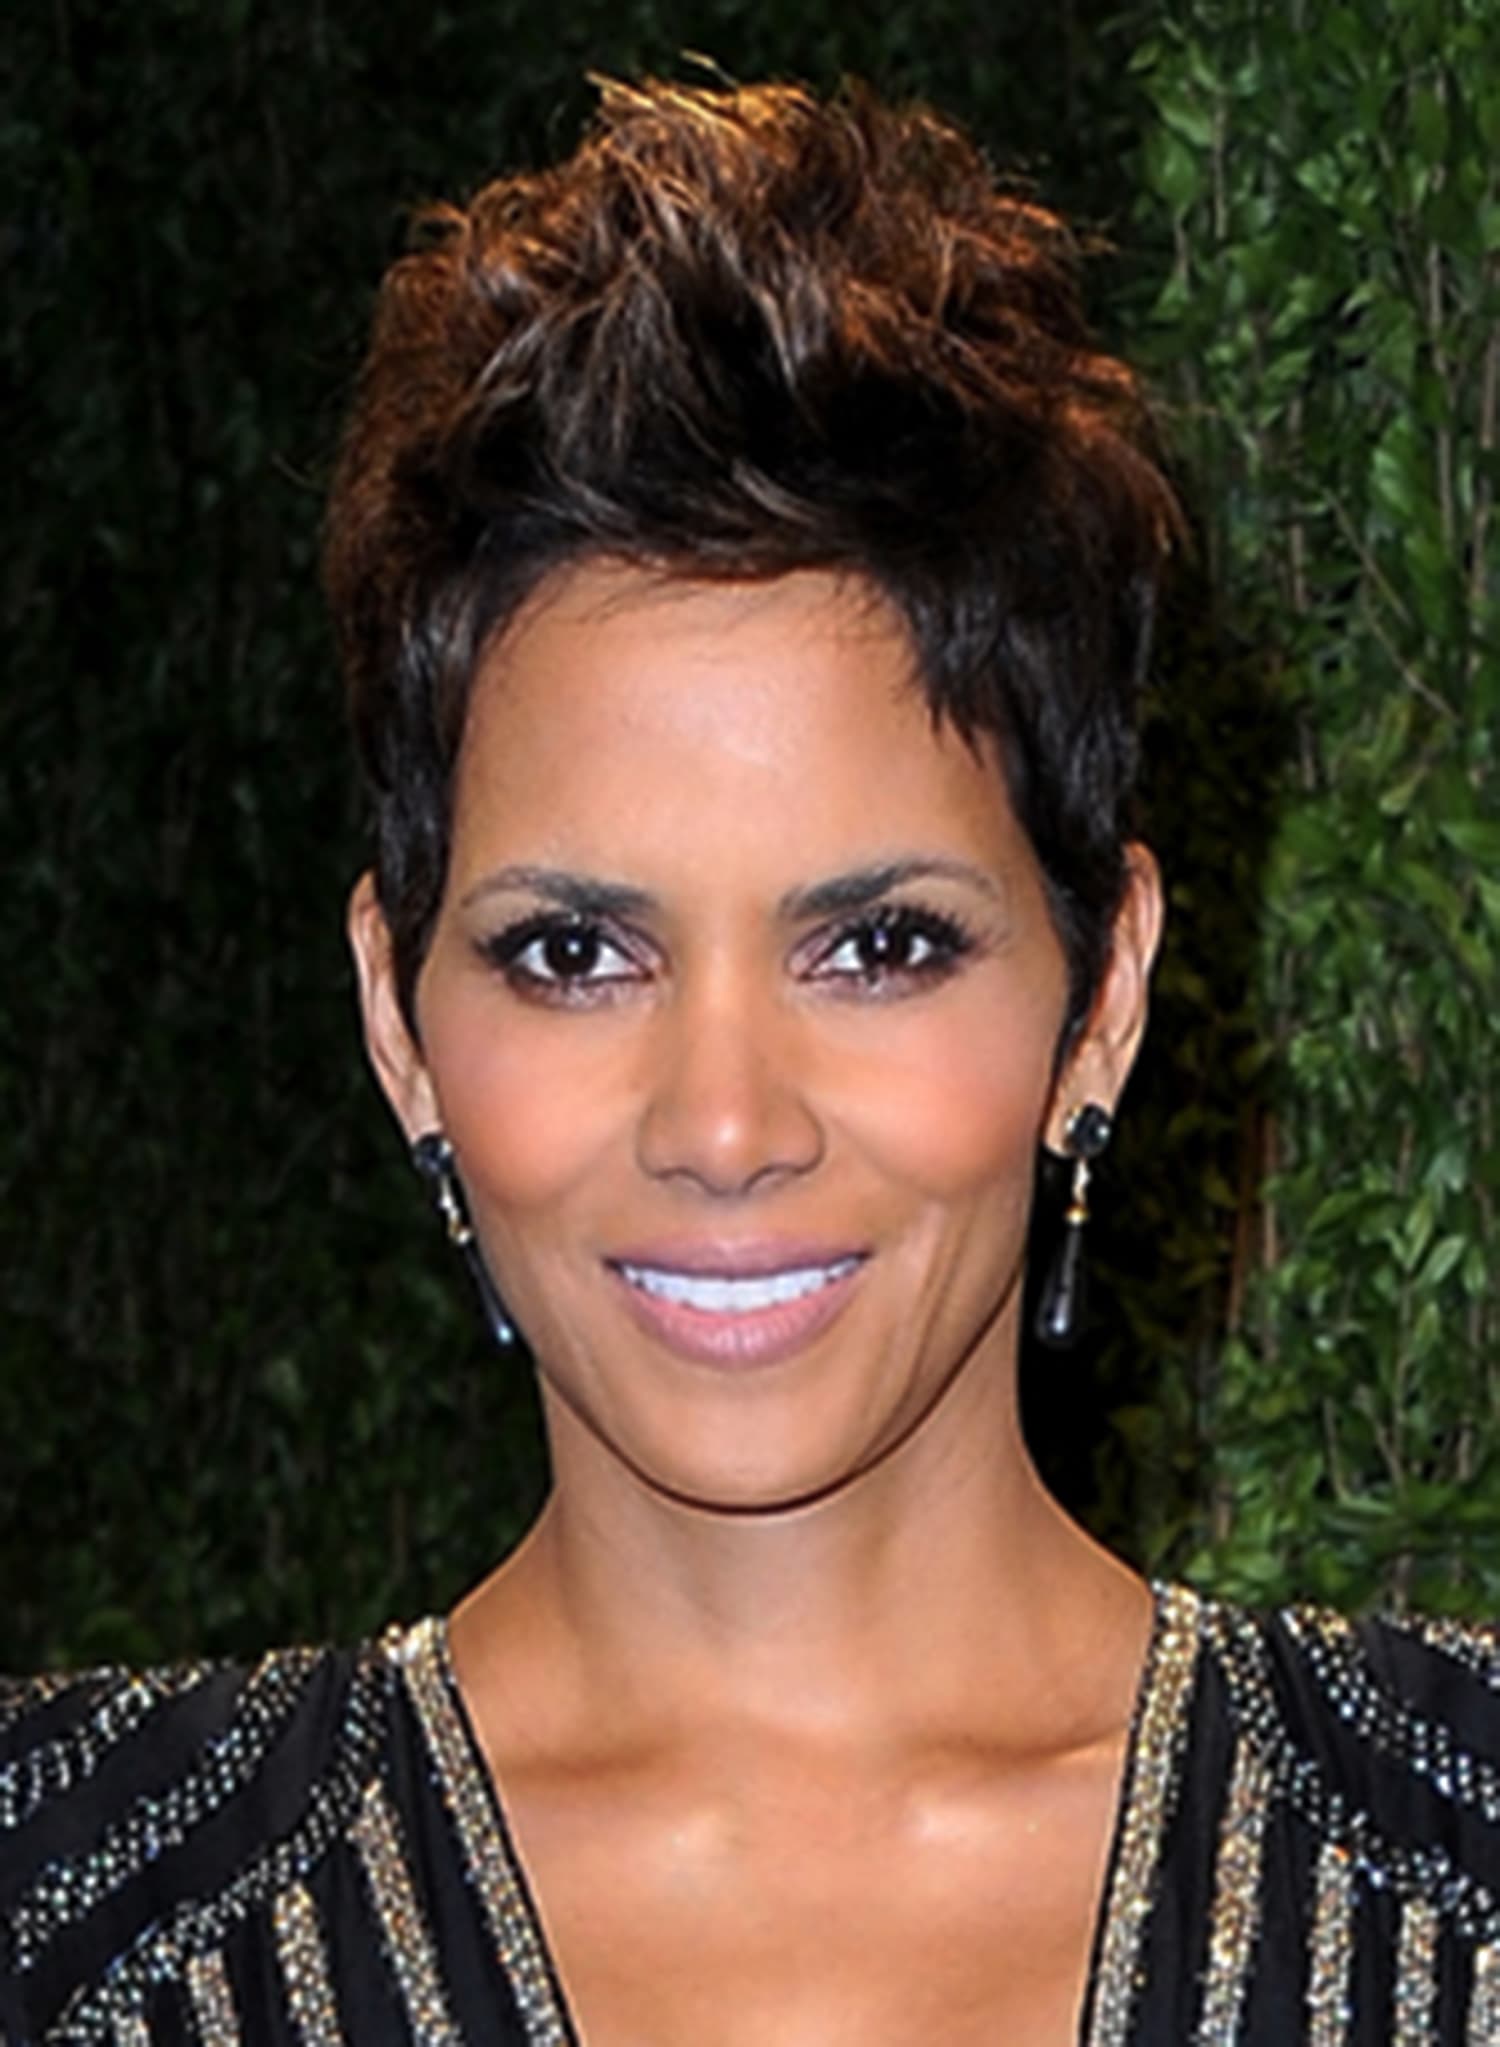 Halle Berry's new short hairstyle is a bowl cut!